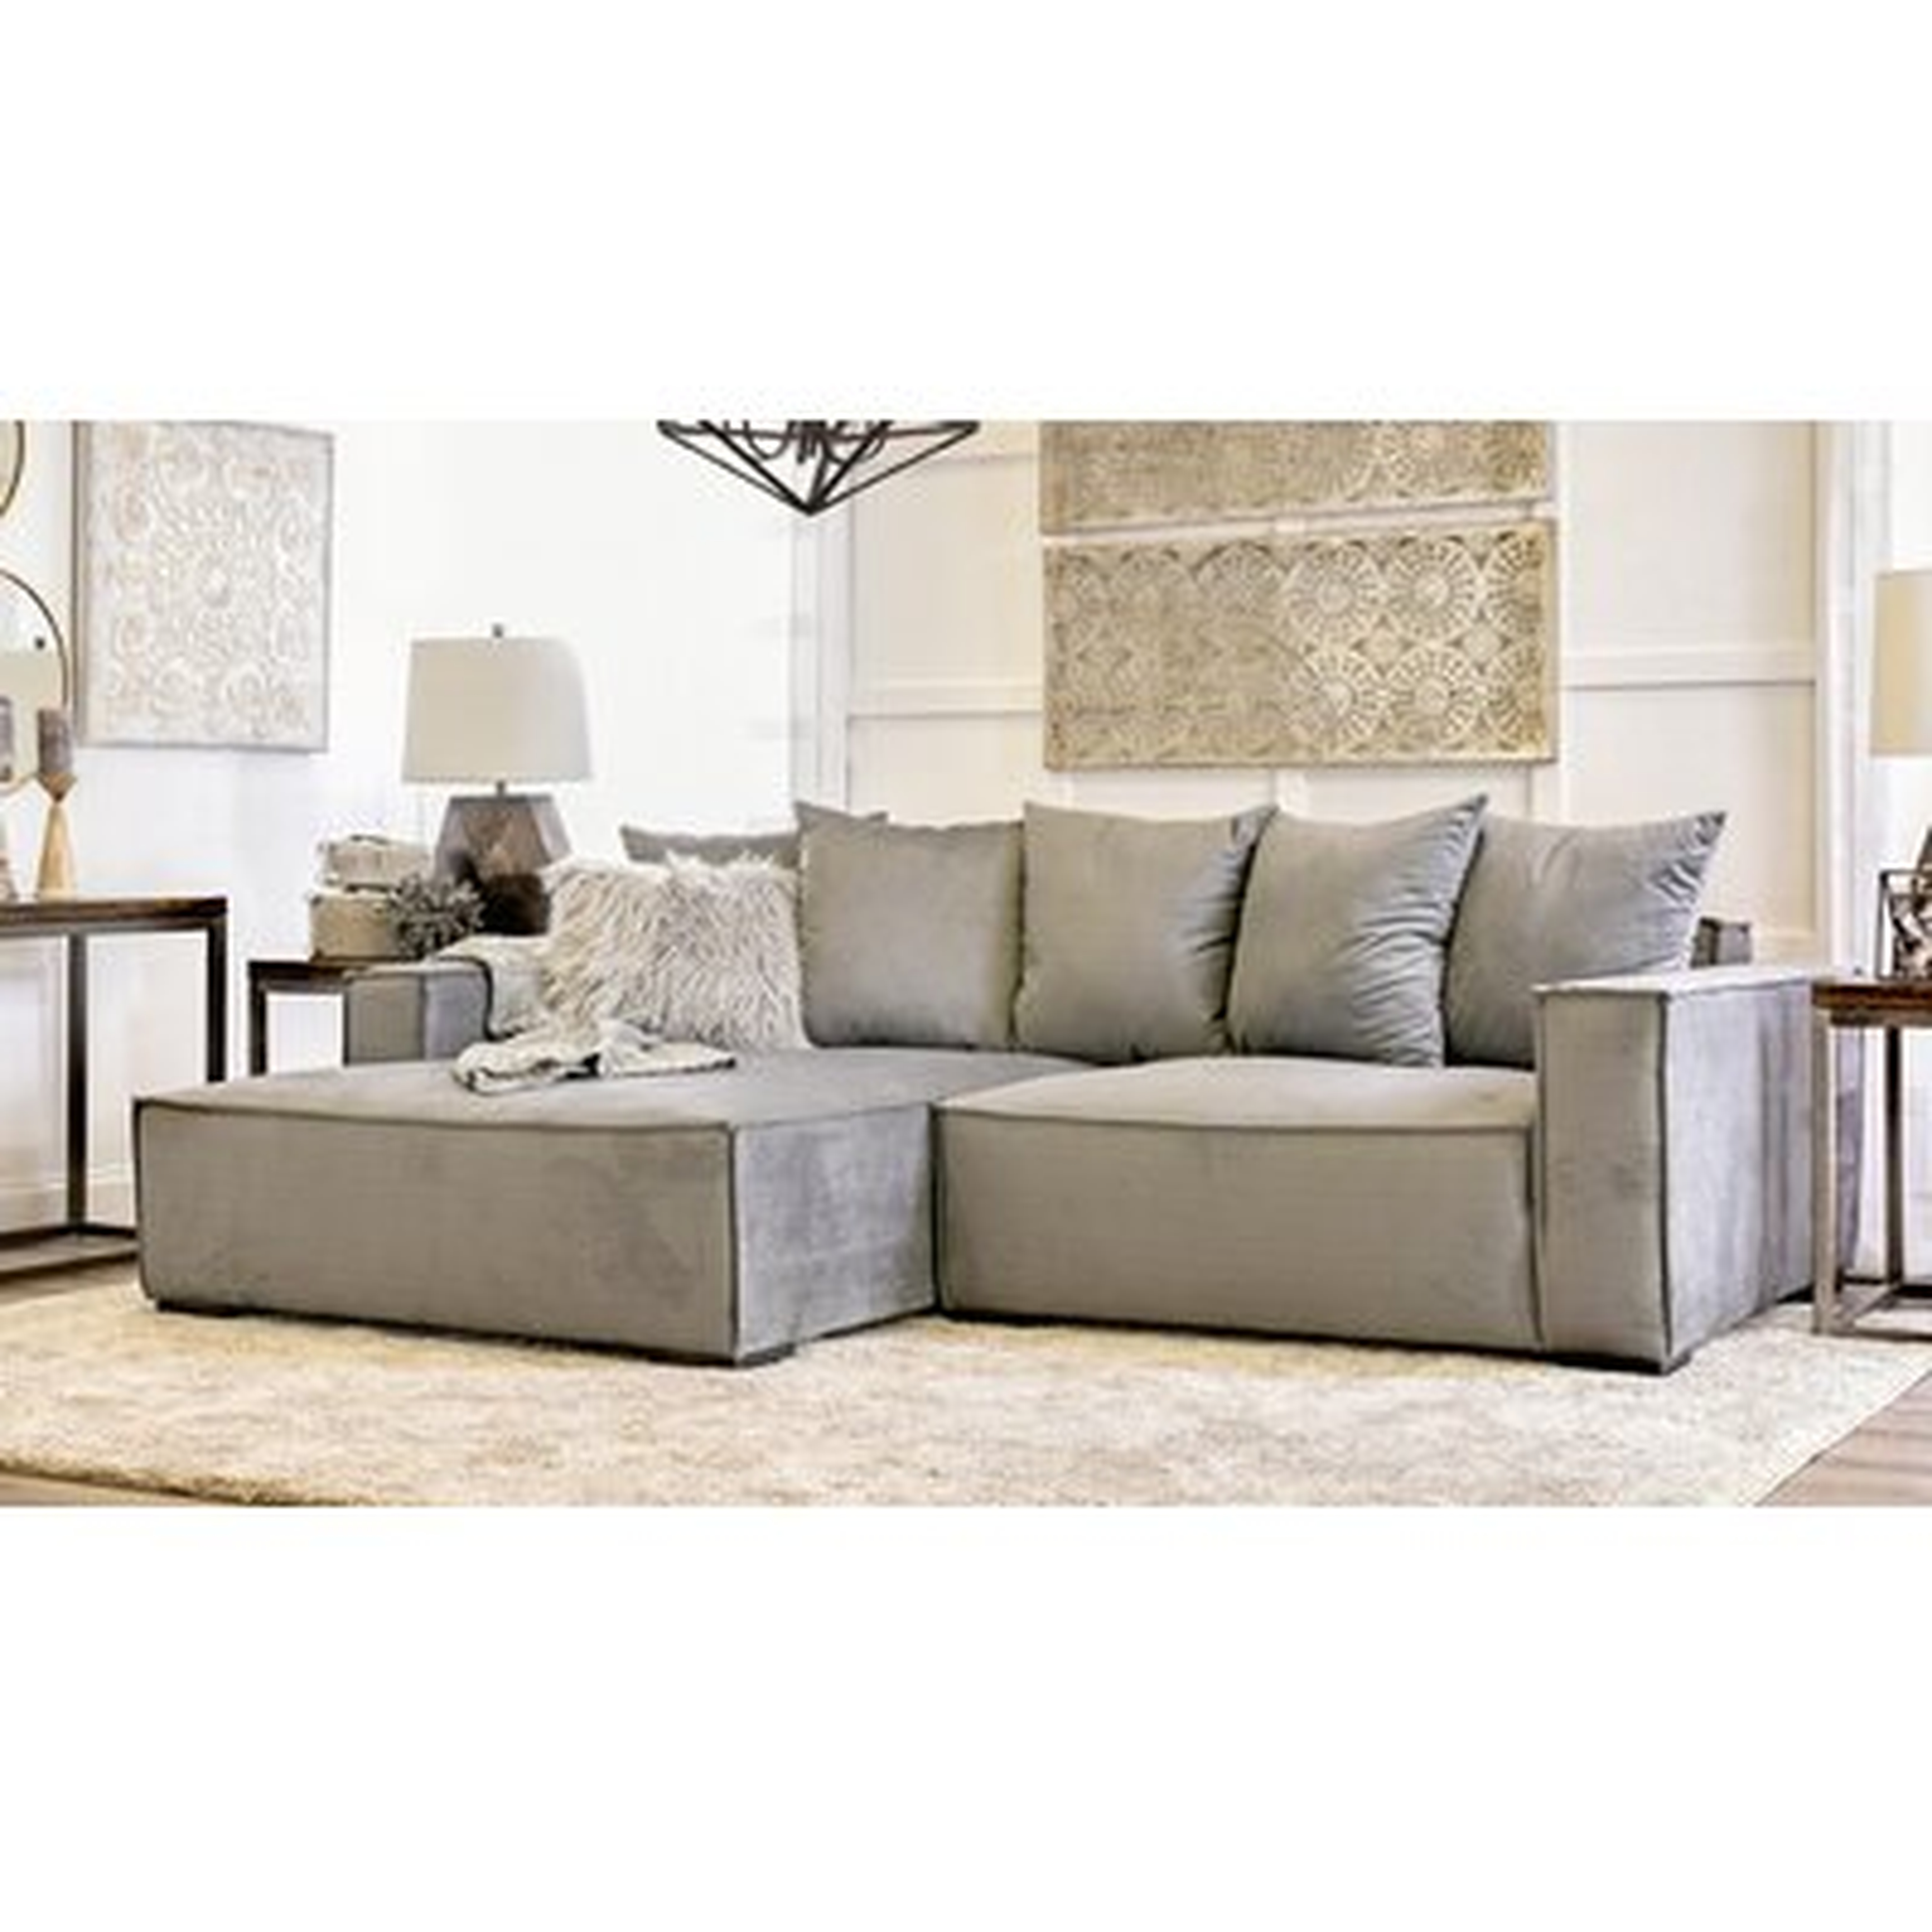 Madison Sectional In Stock 4/10 - Wayfair